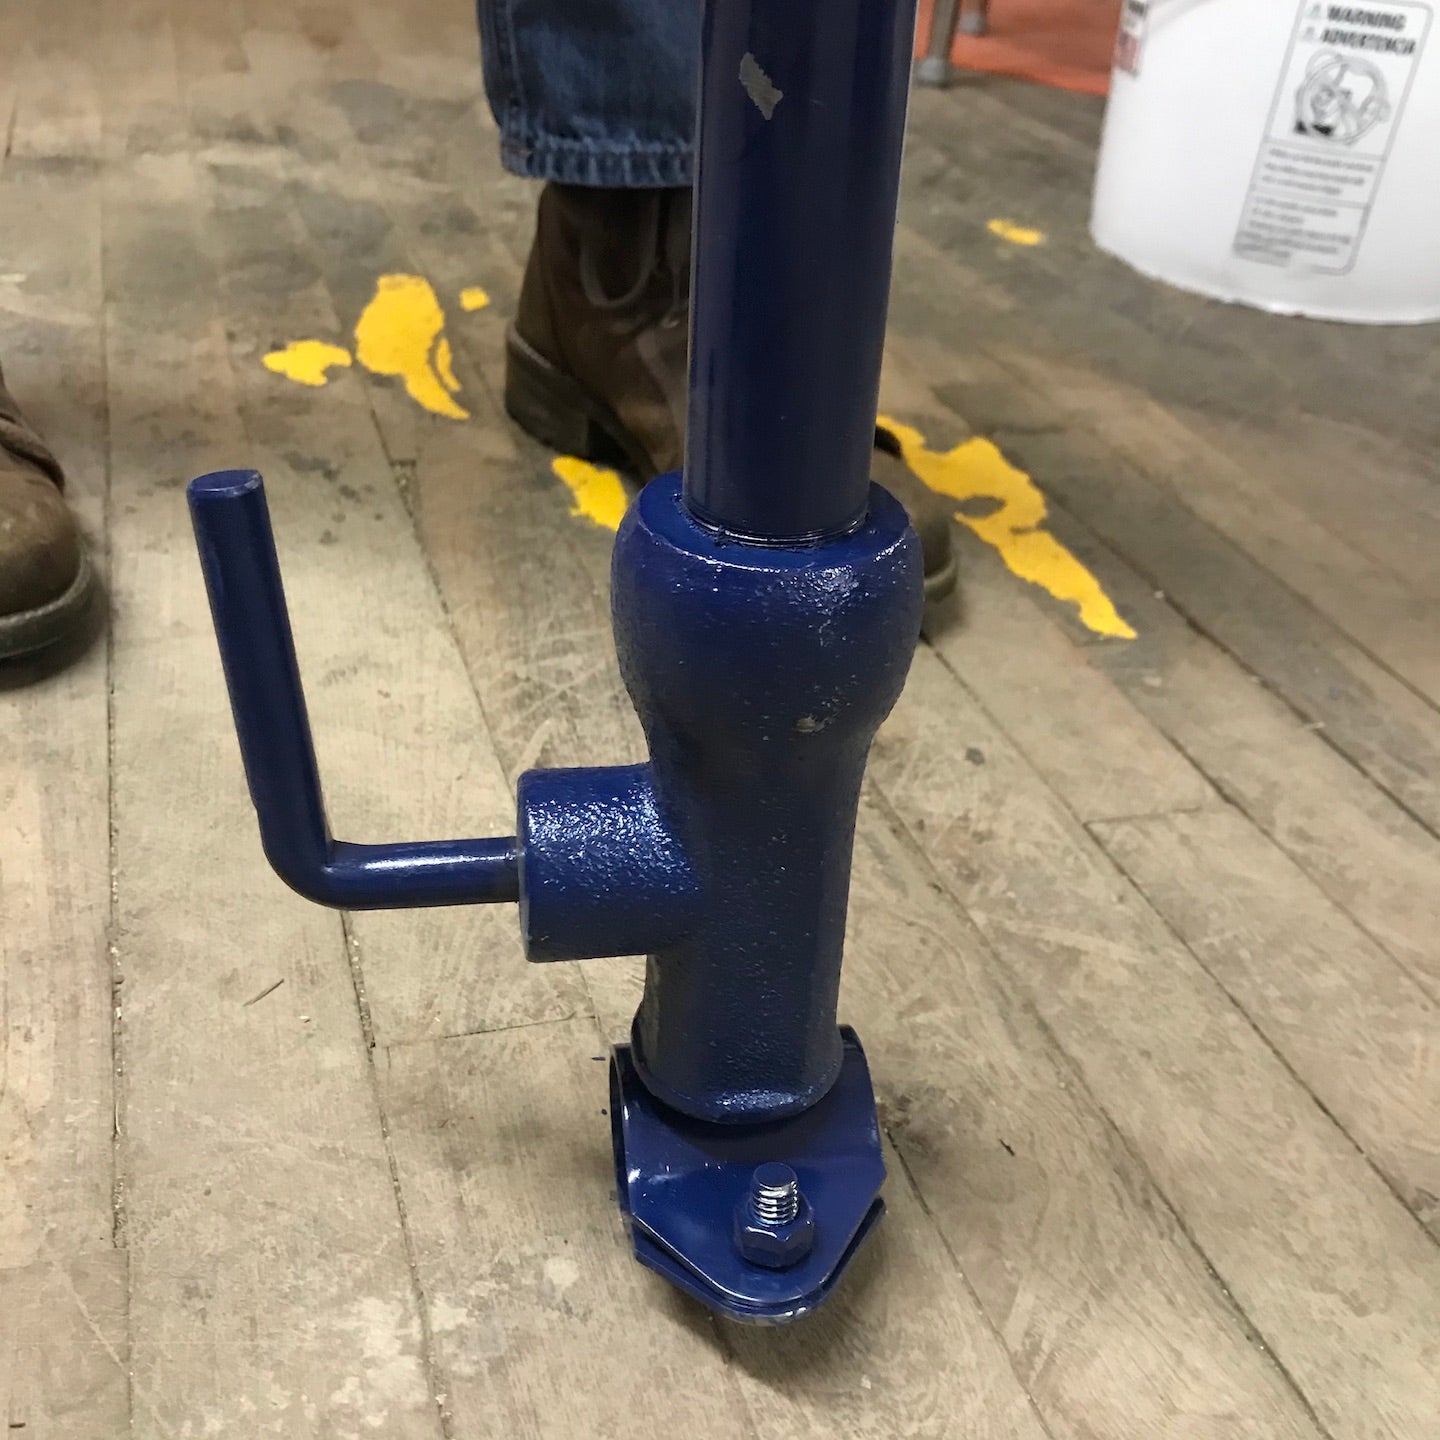 Seymour Mfg. Adjustable Industrial Digwell Auger (S500)